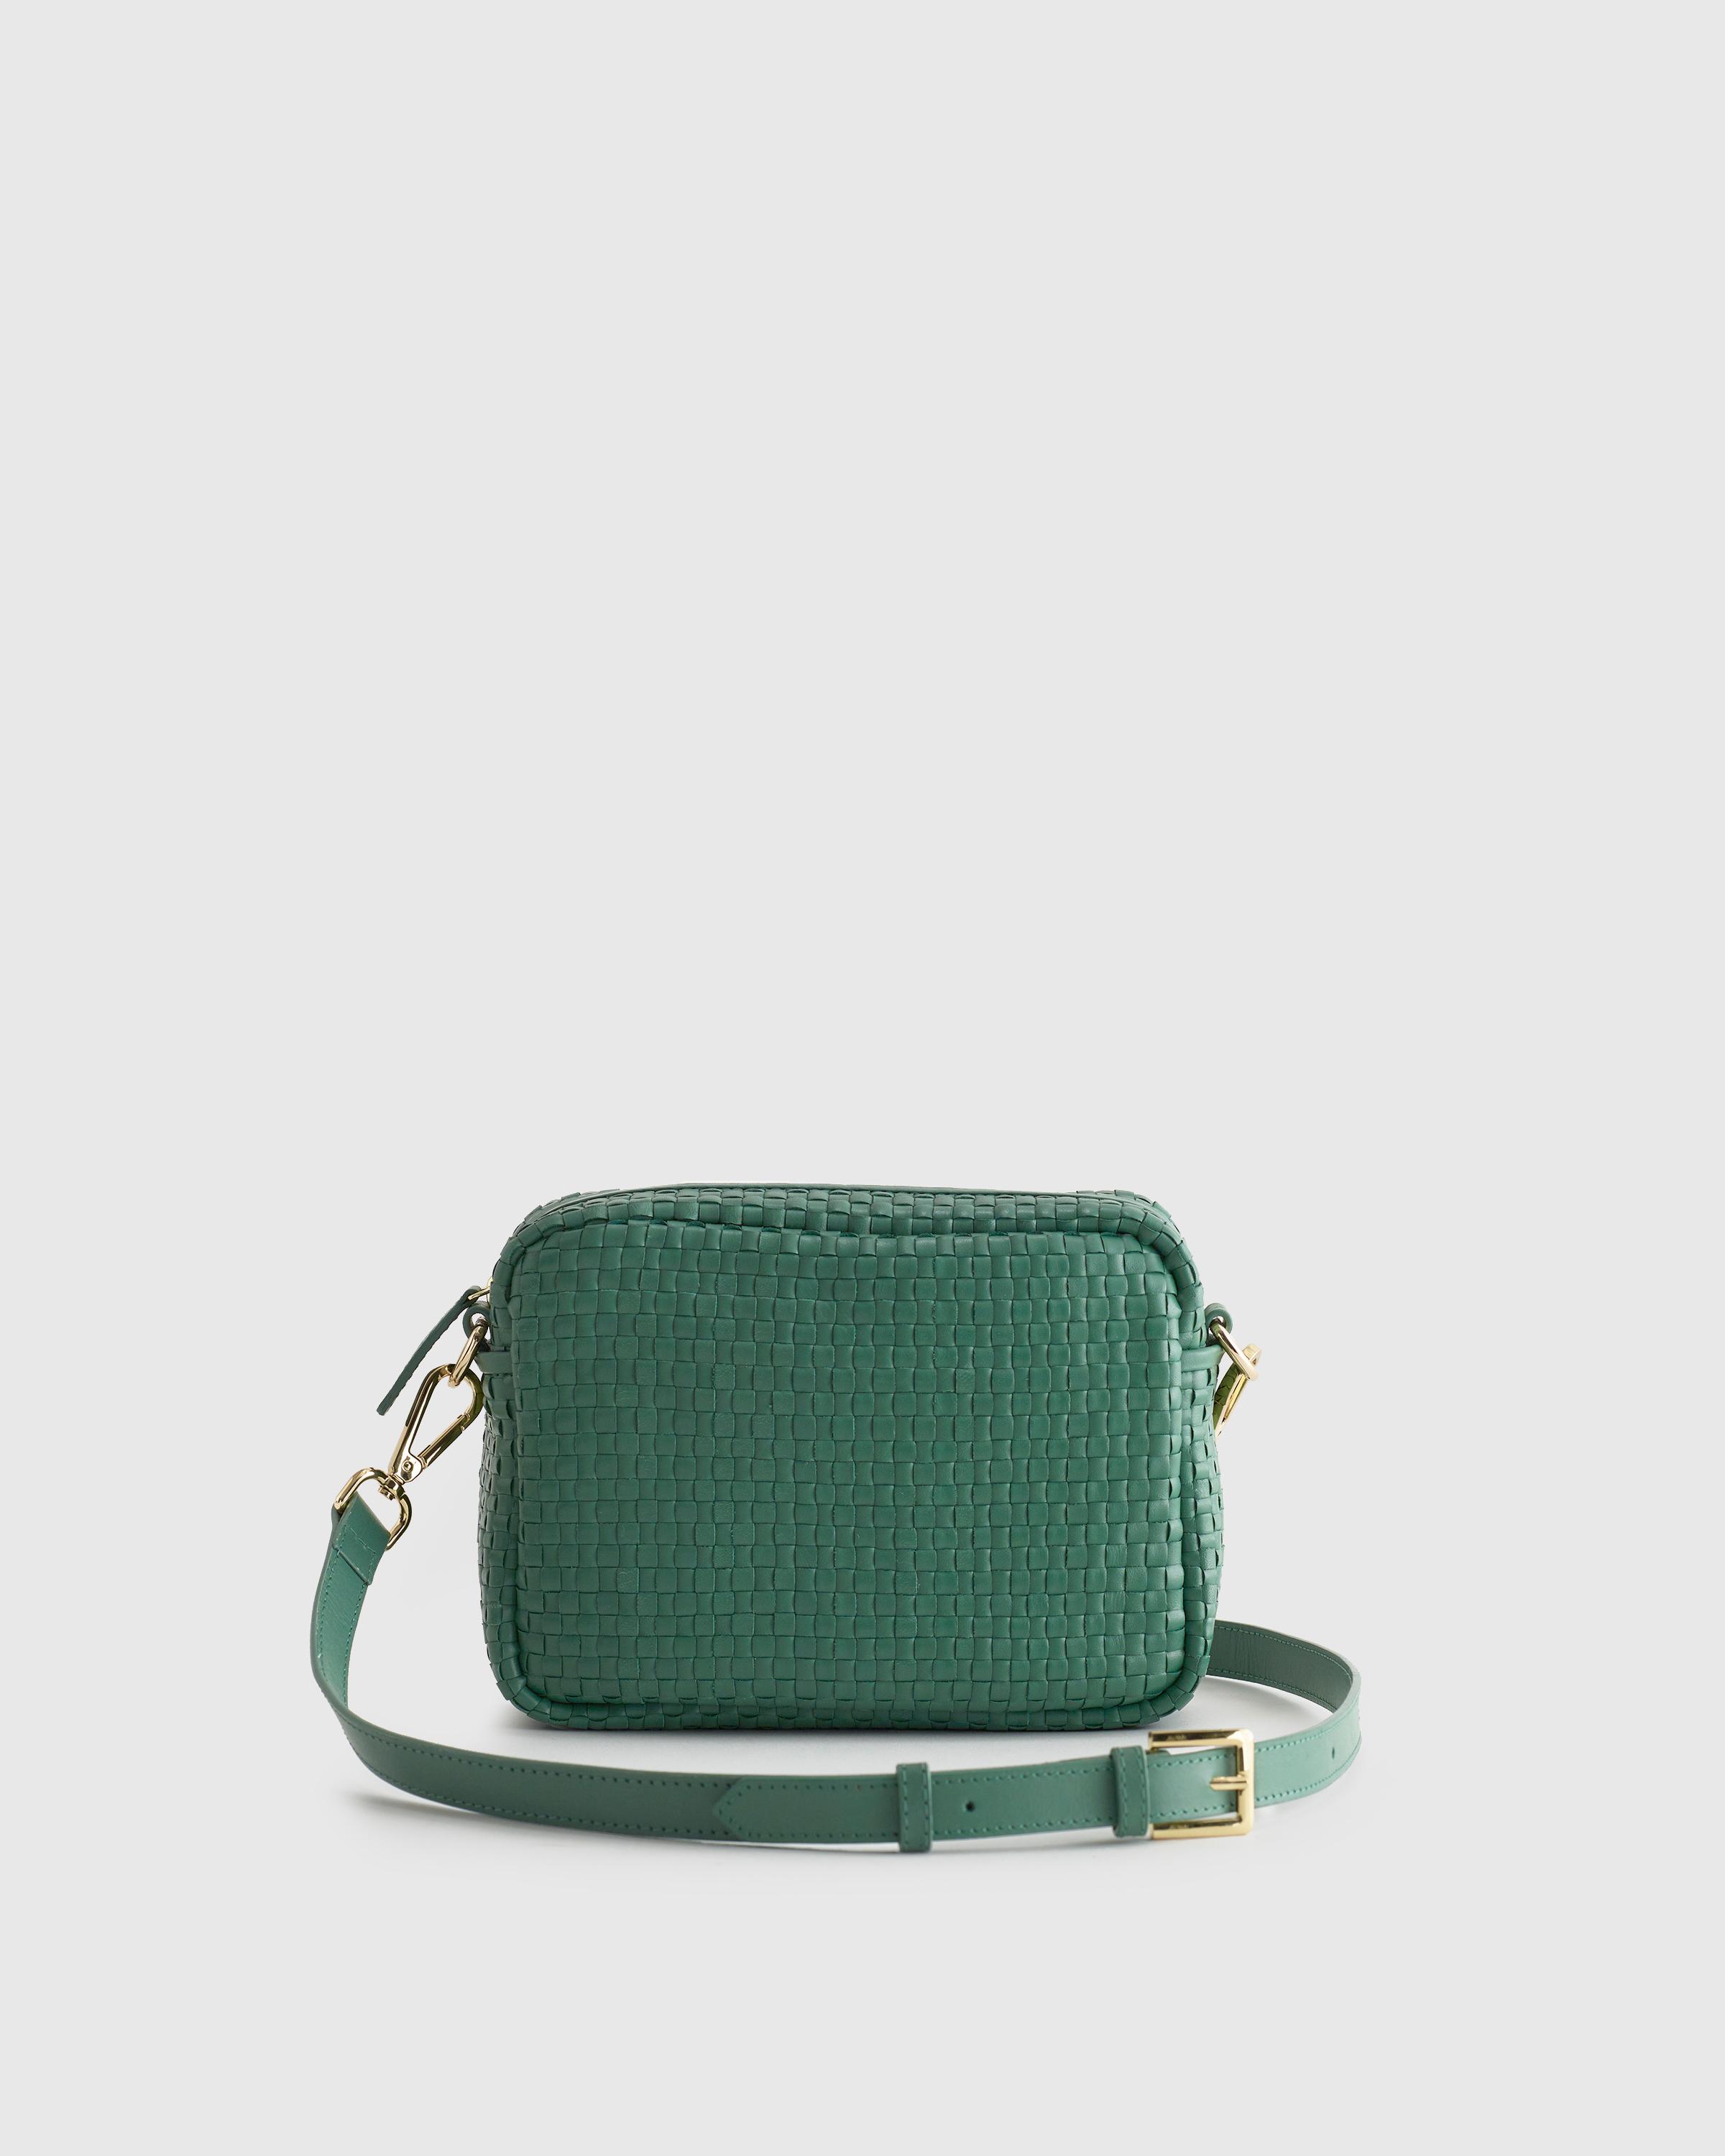 New in: Italian leather crossbody bags - Quince